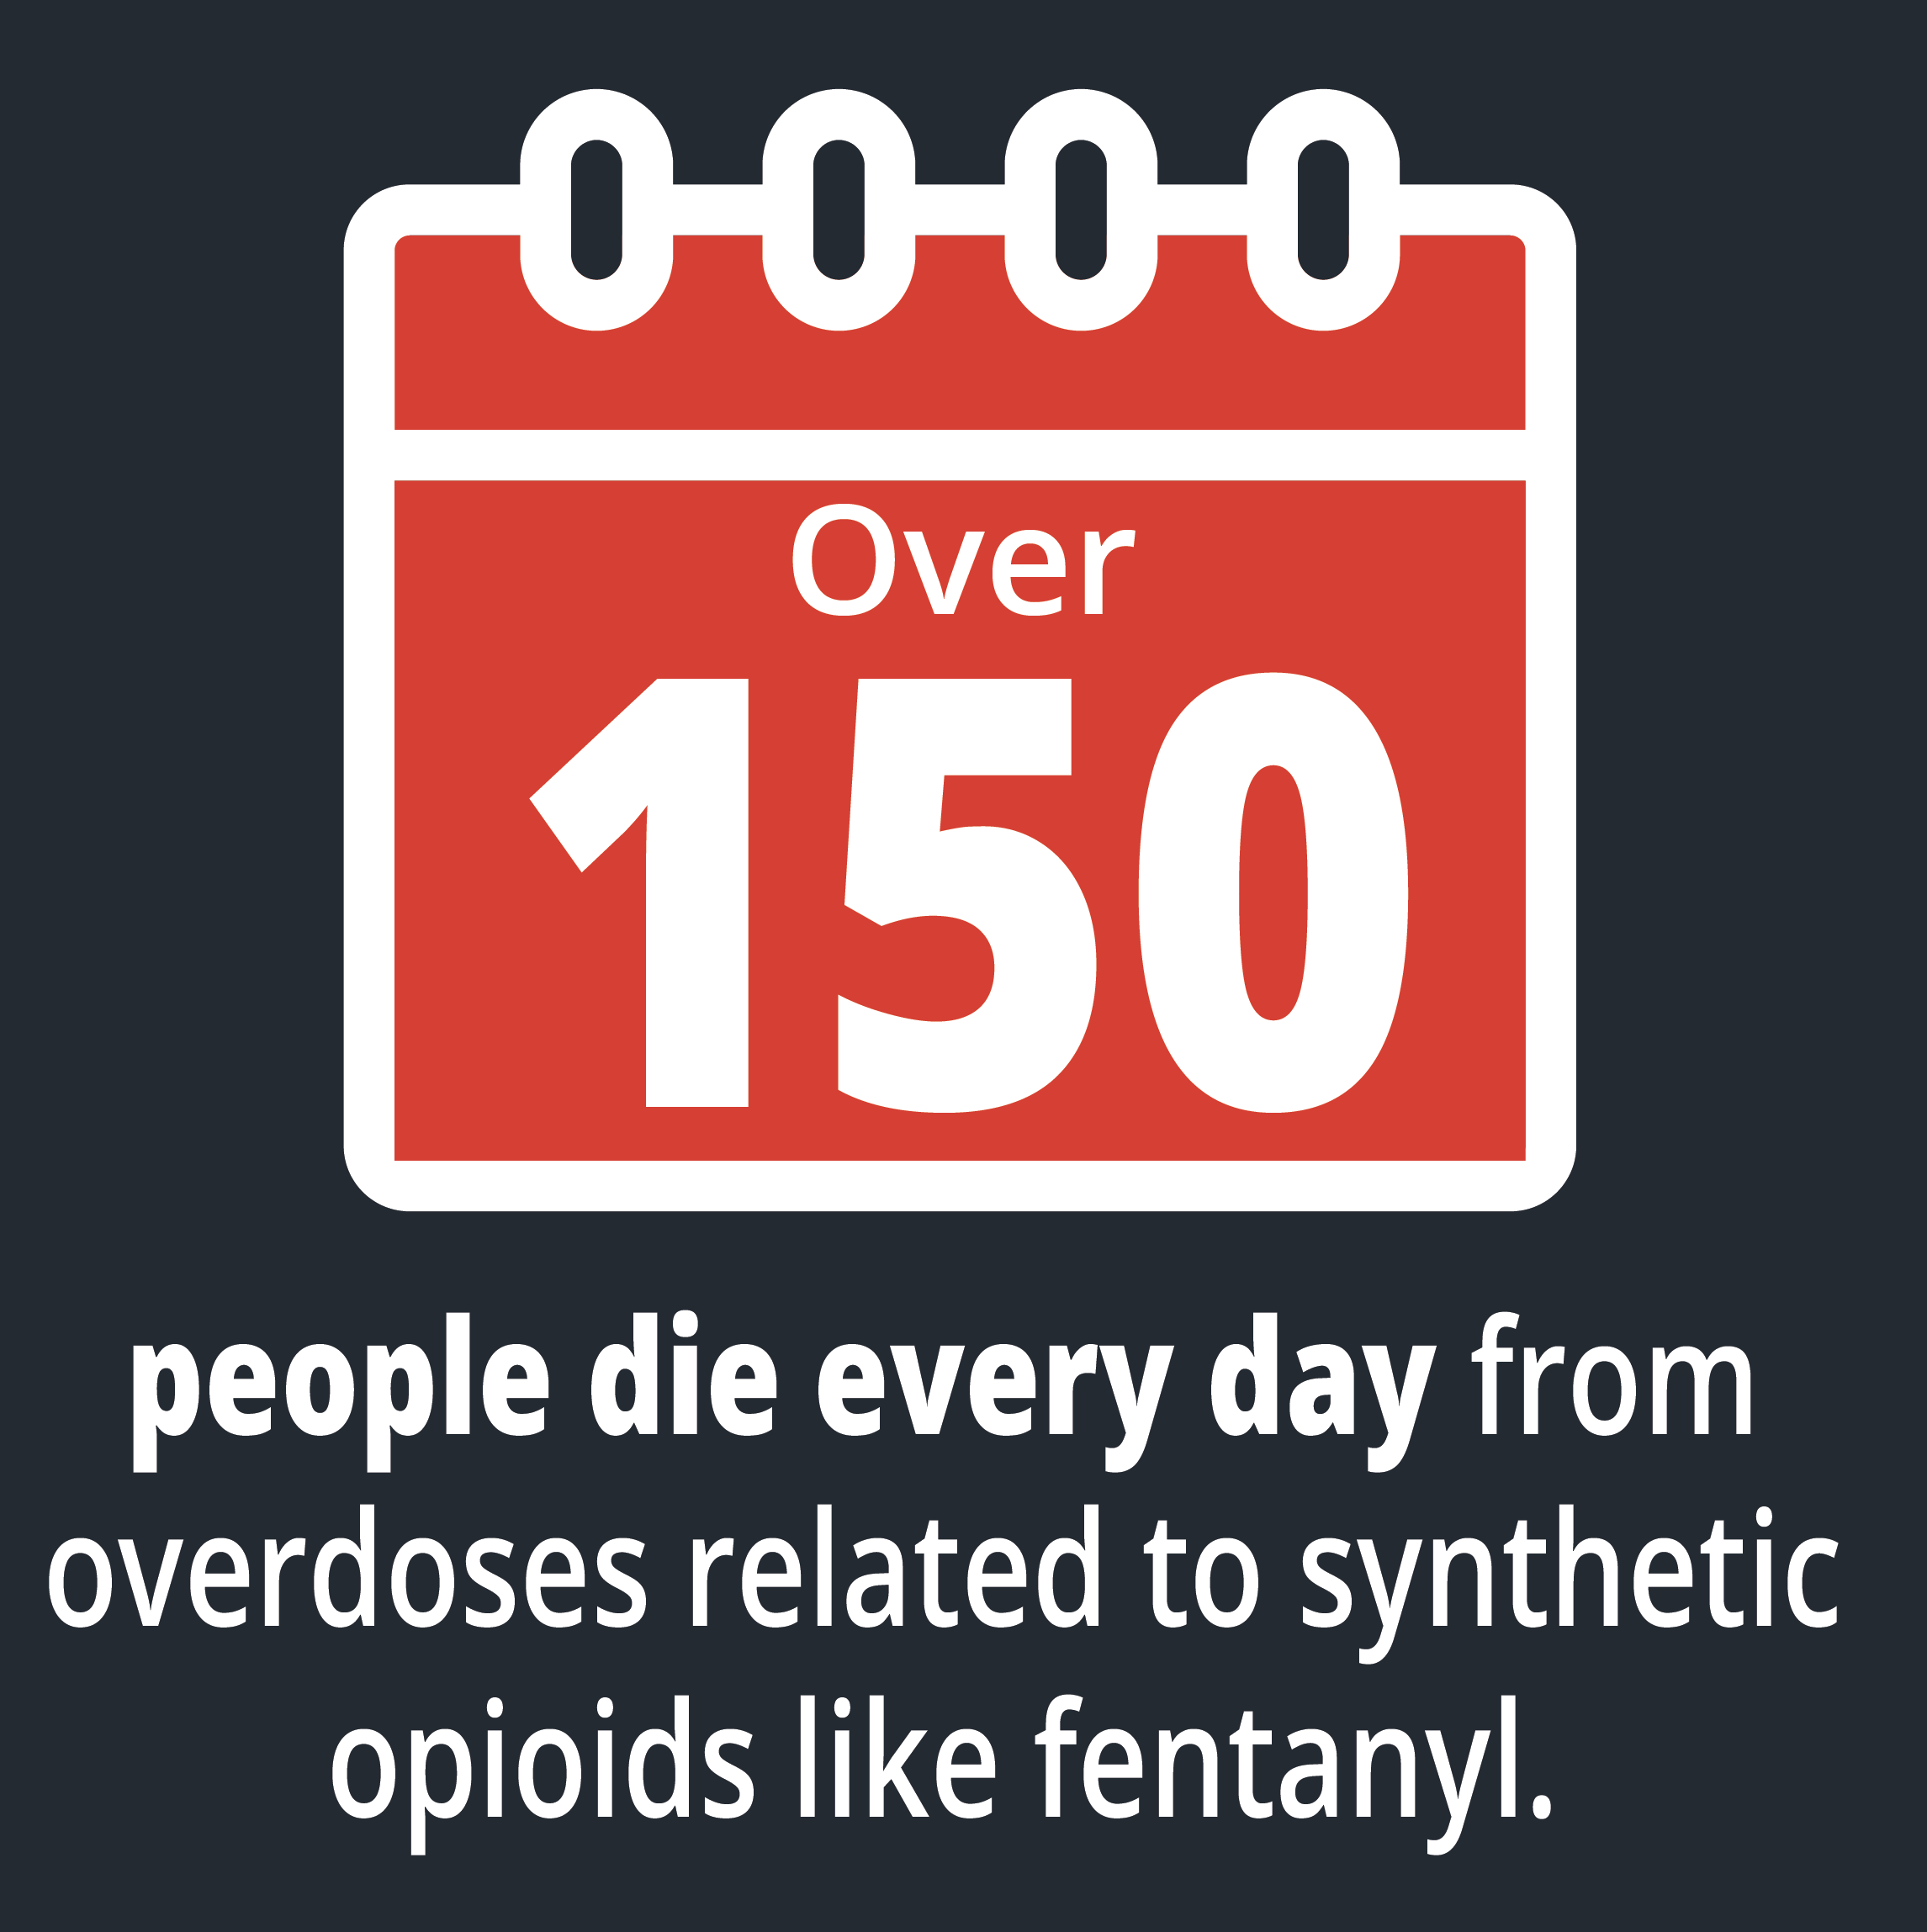 Over 150 people die every day from overdoses related to synthetic opioids like fentanyl